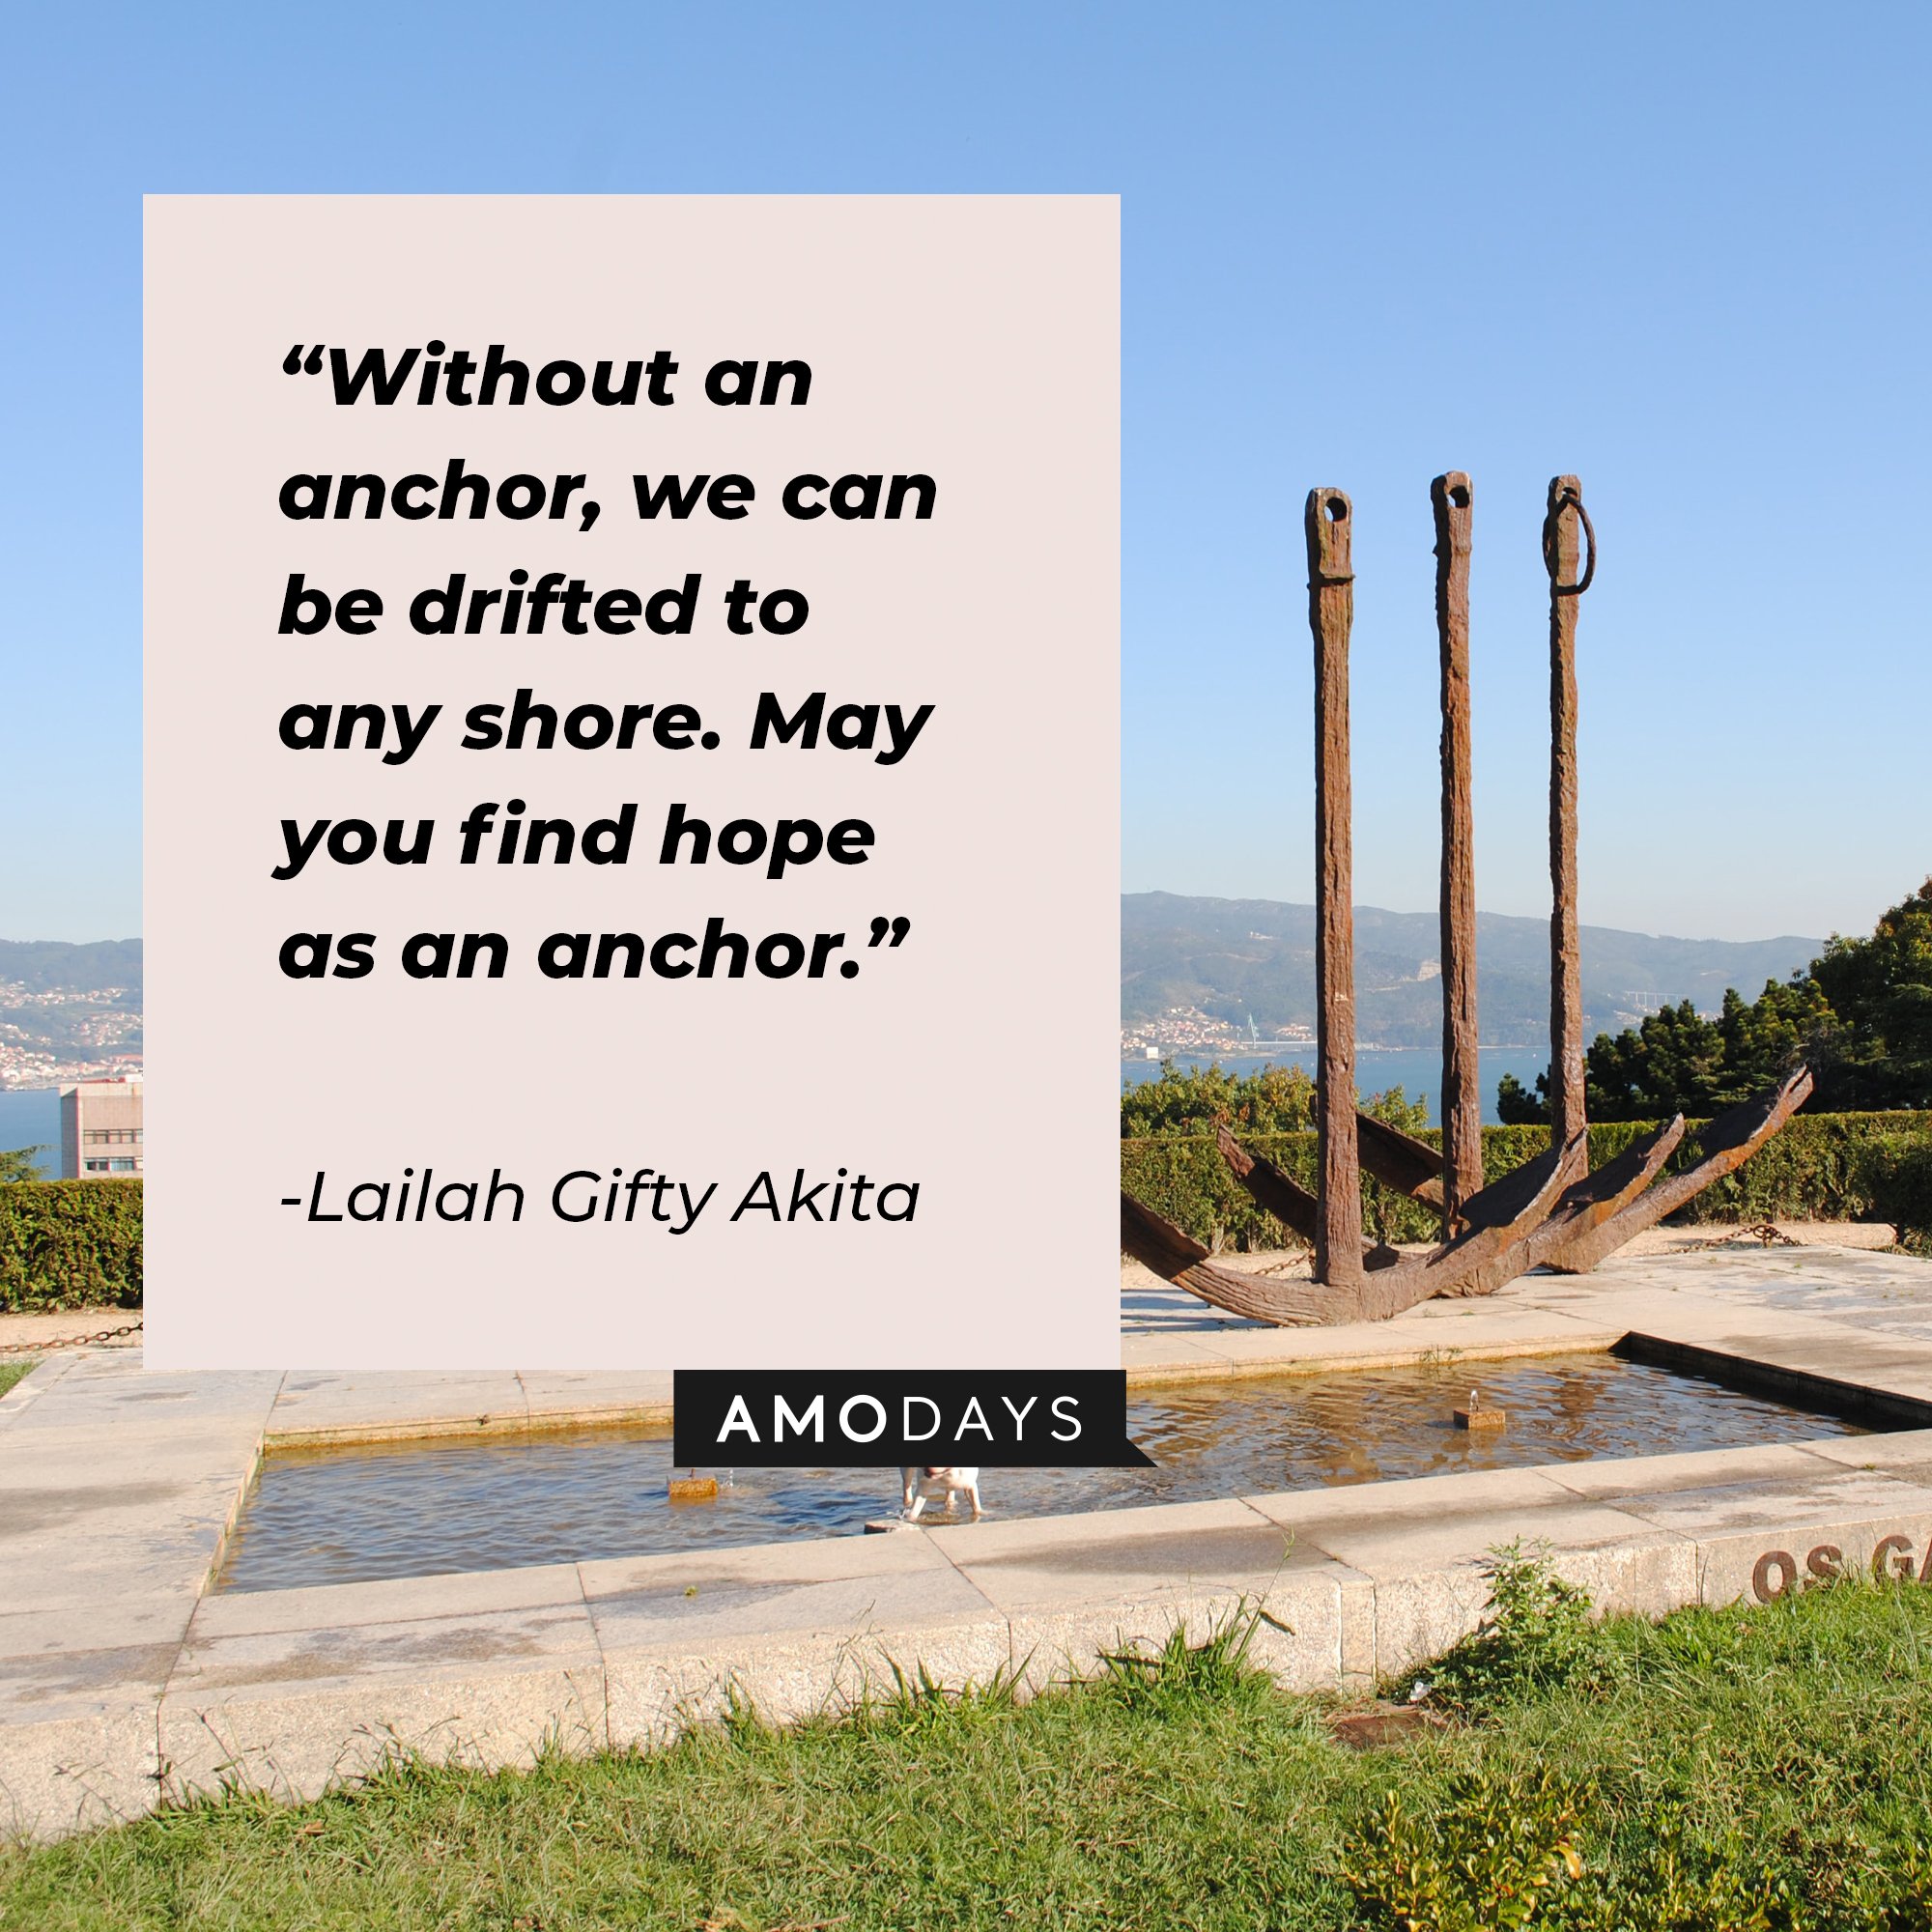 Lailah Gifty Akita's quote: "Without an anchor, we can be drifted to any shore. May you find hope as an anchor." | Image: AmoDays